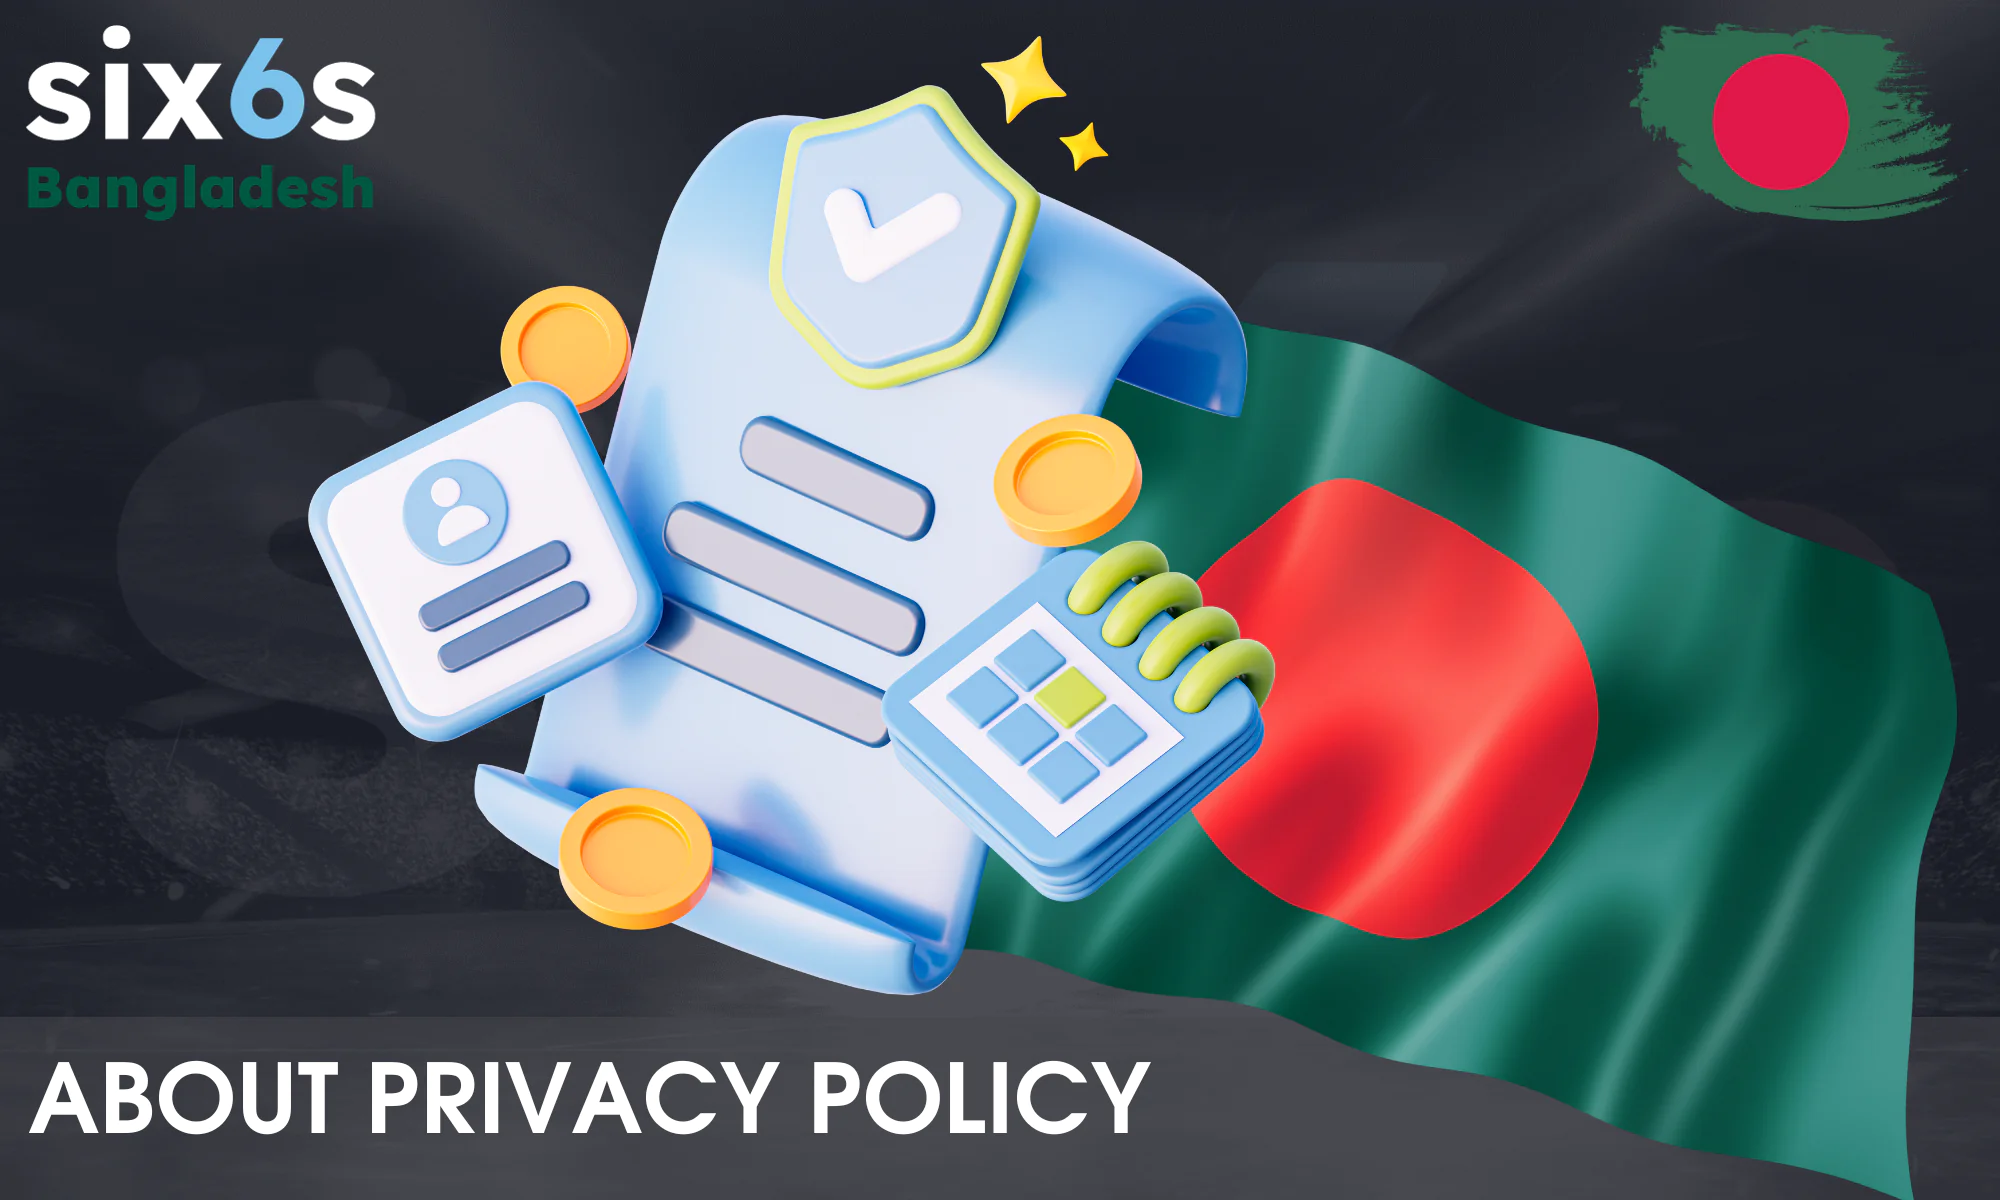 Information about Six6s privacy policy